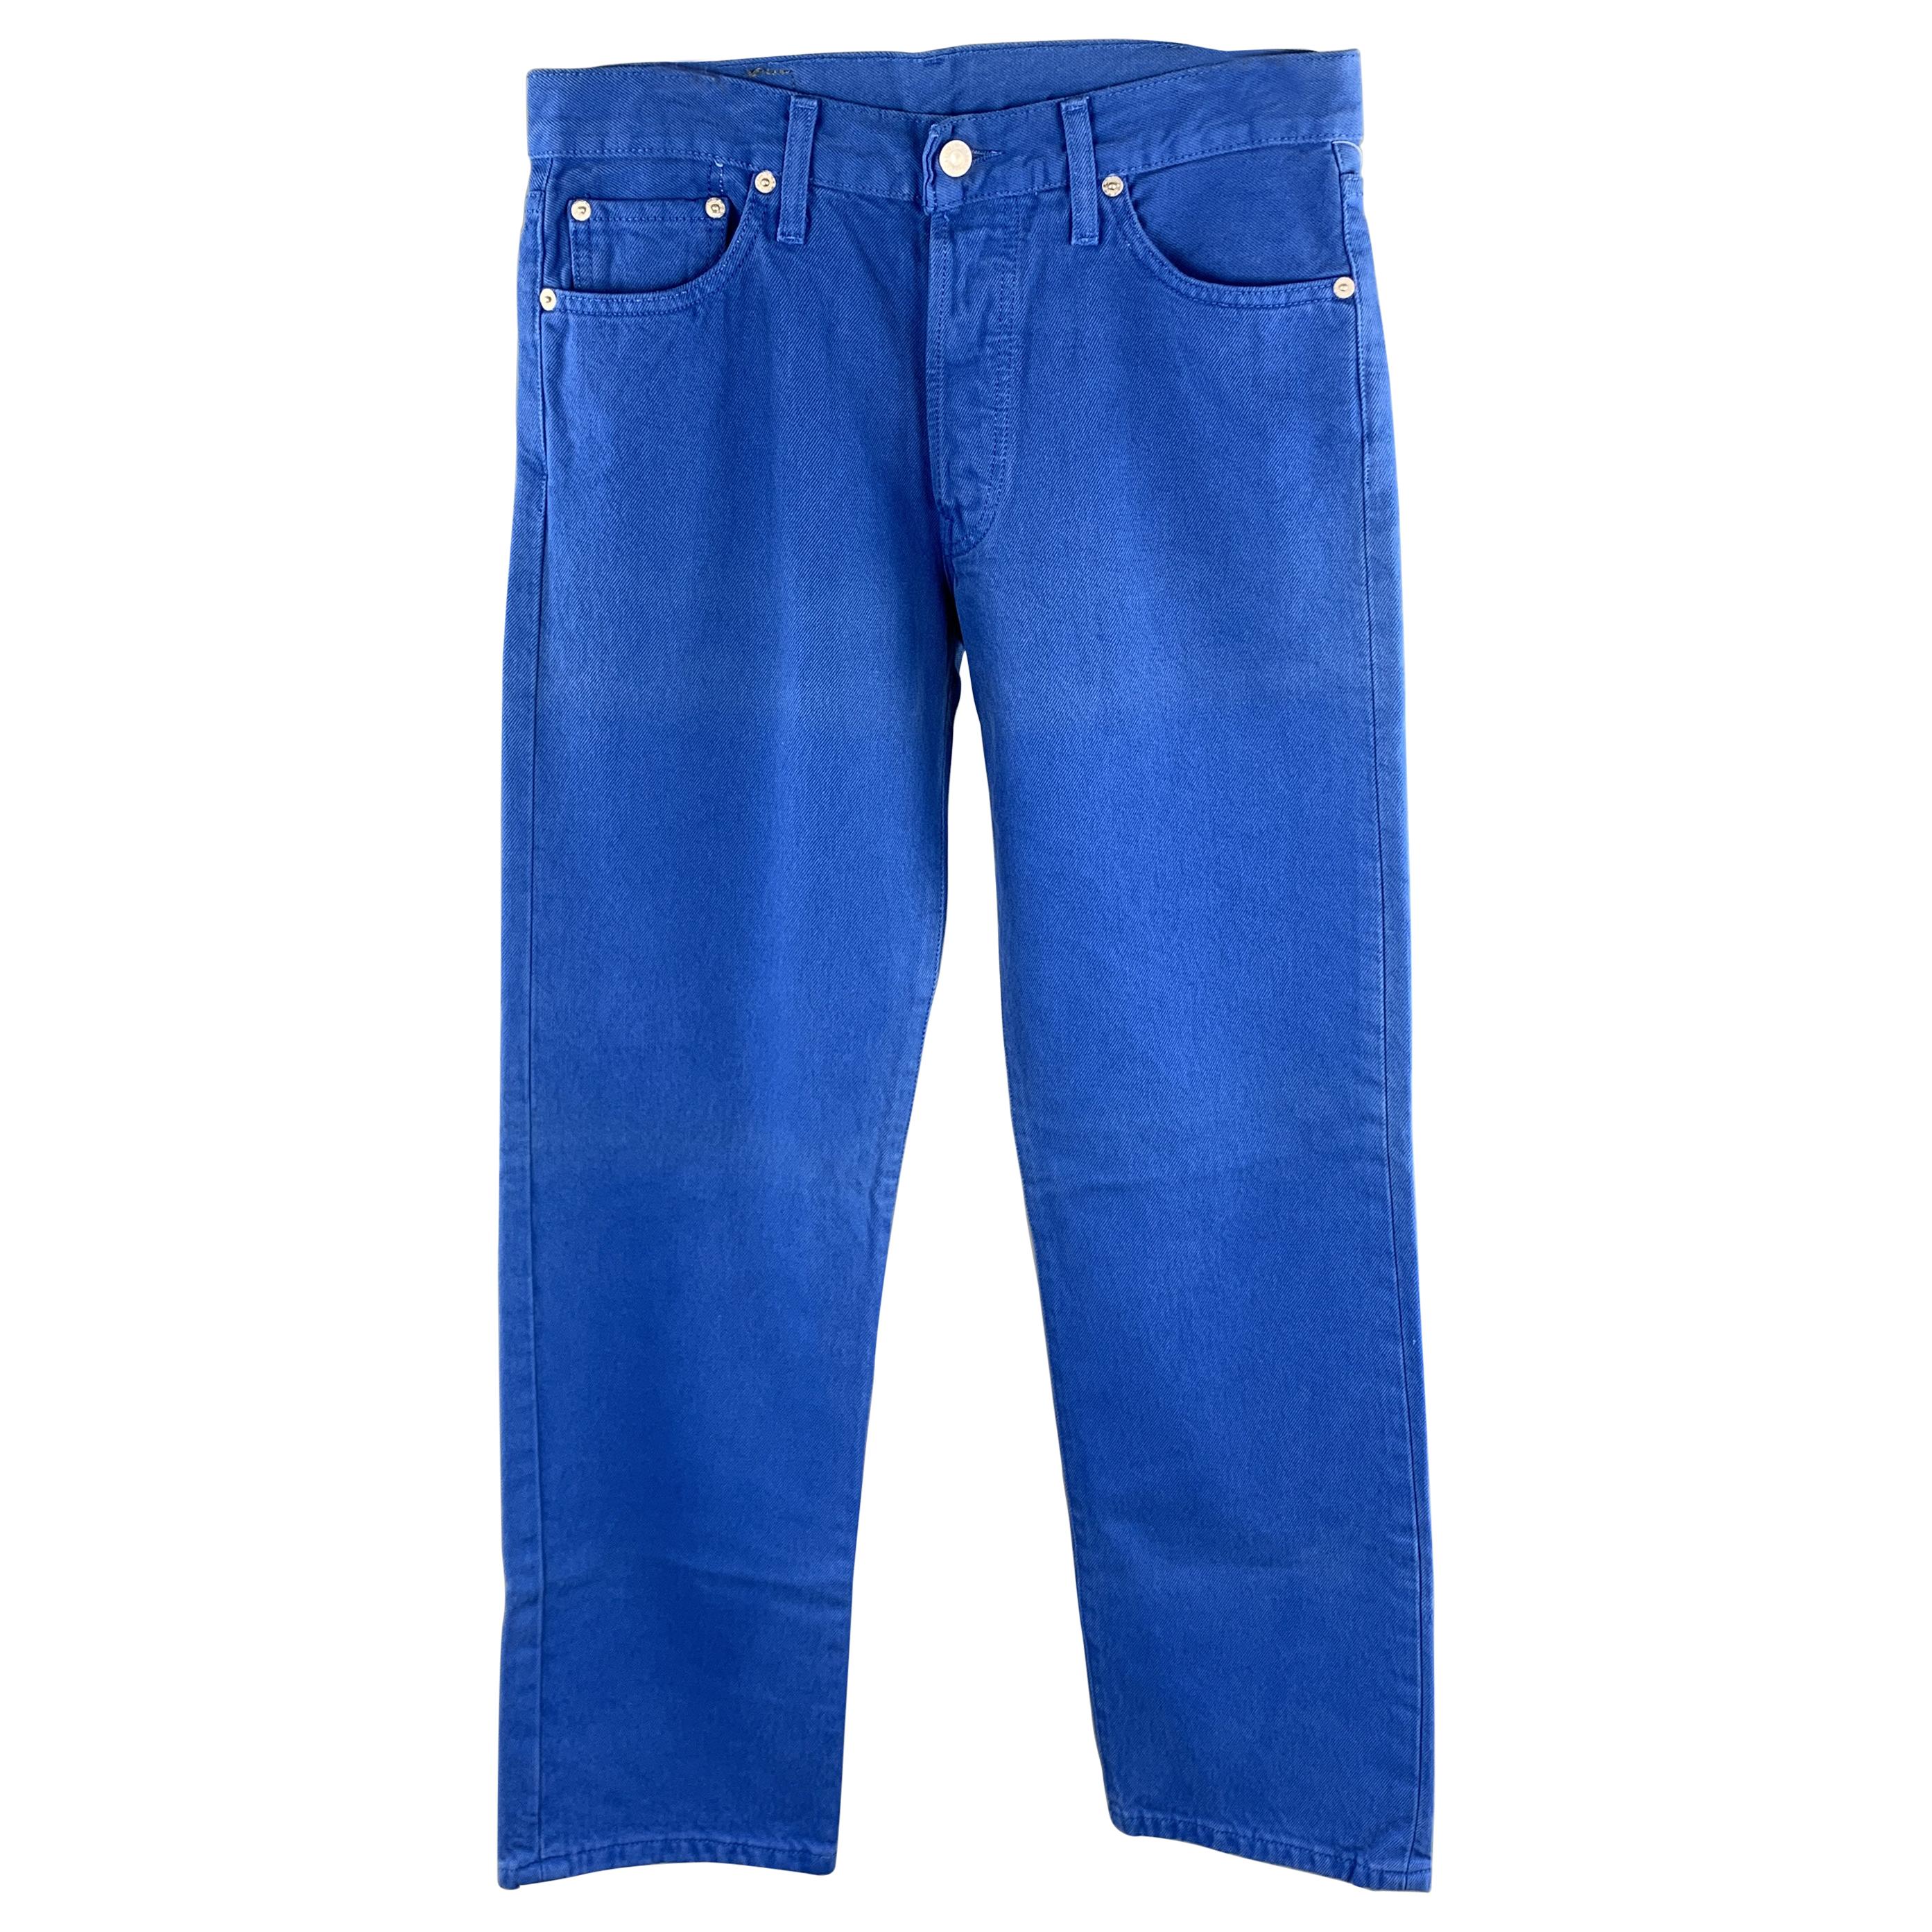 LEVI'S Size 30 Royal Blue Solid Cotton Button Fly Casual Pants